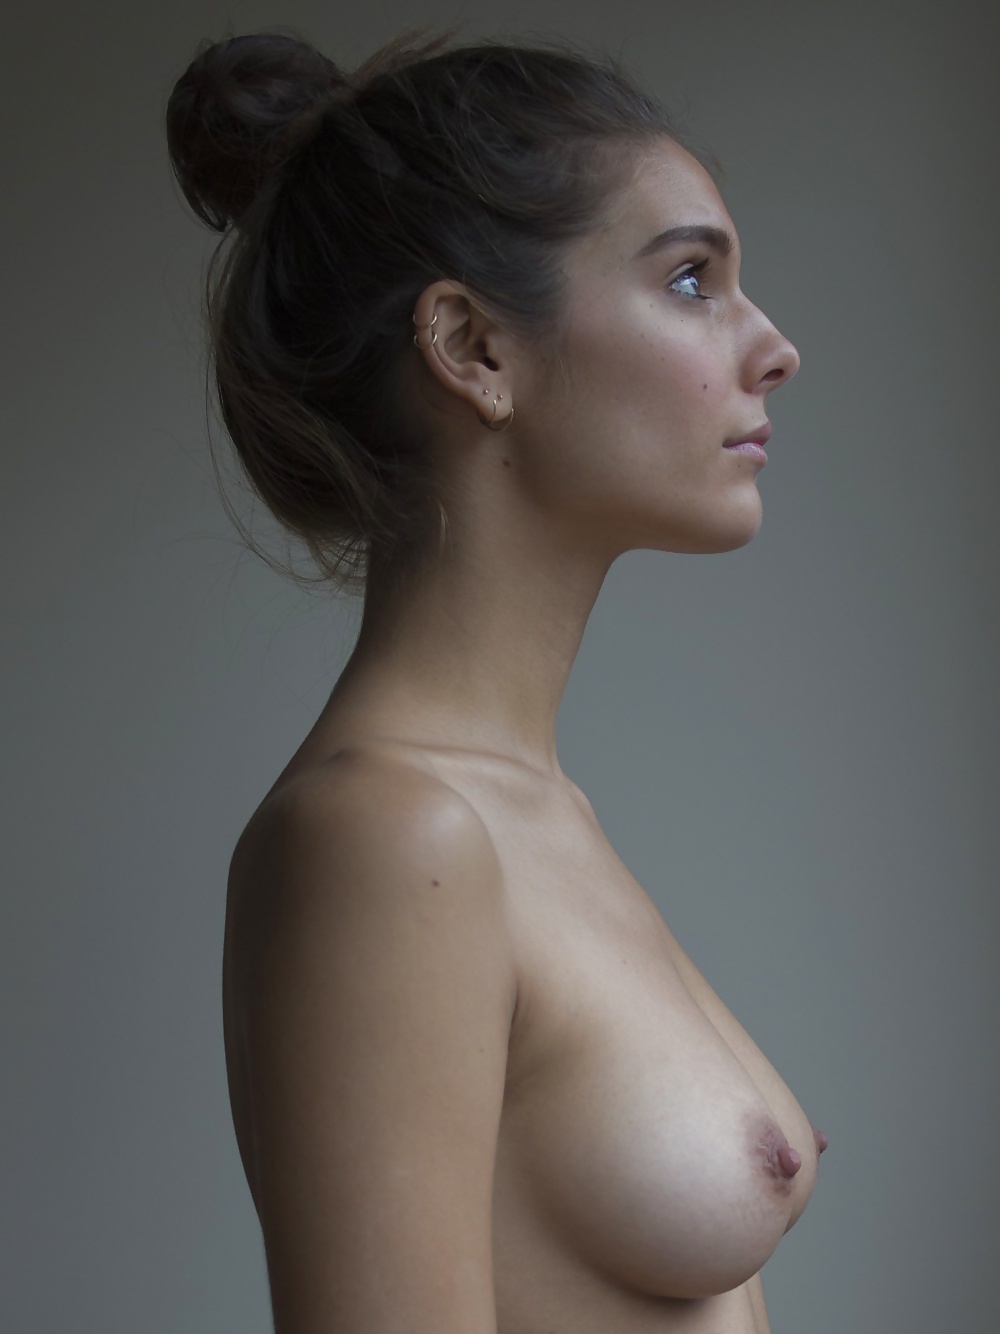 Caitlin Stasey - Herself MAG January 4, 2015 #40710243